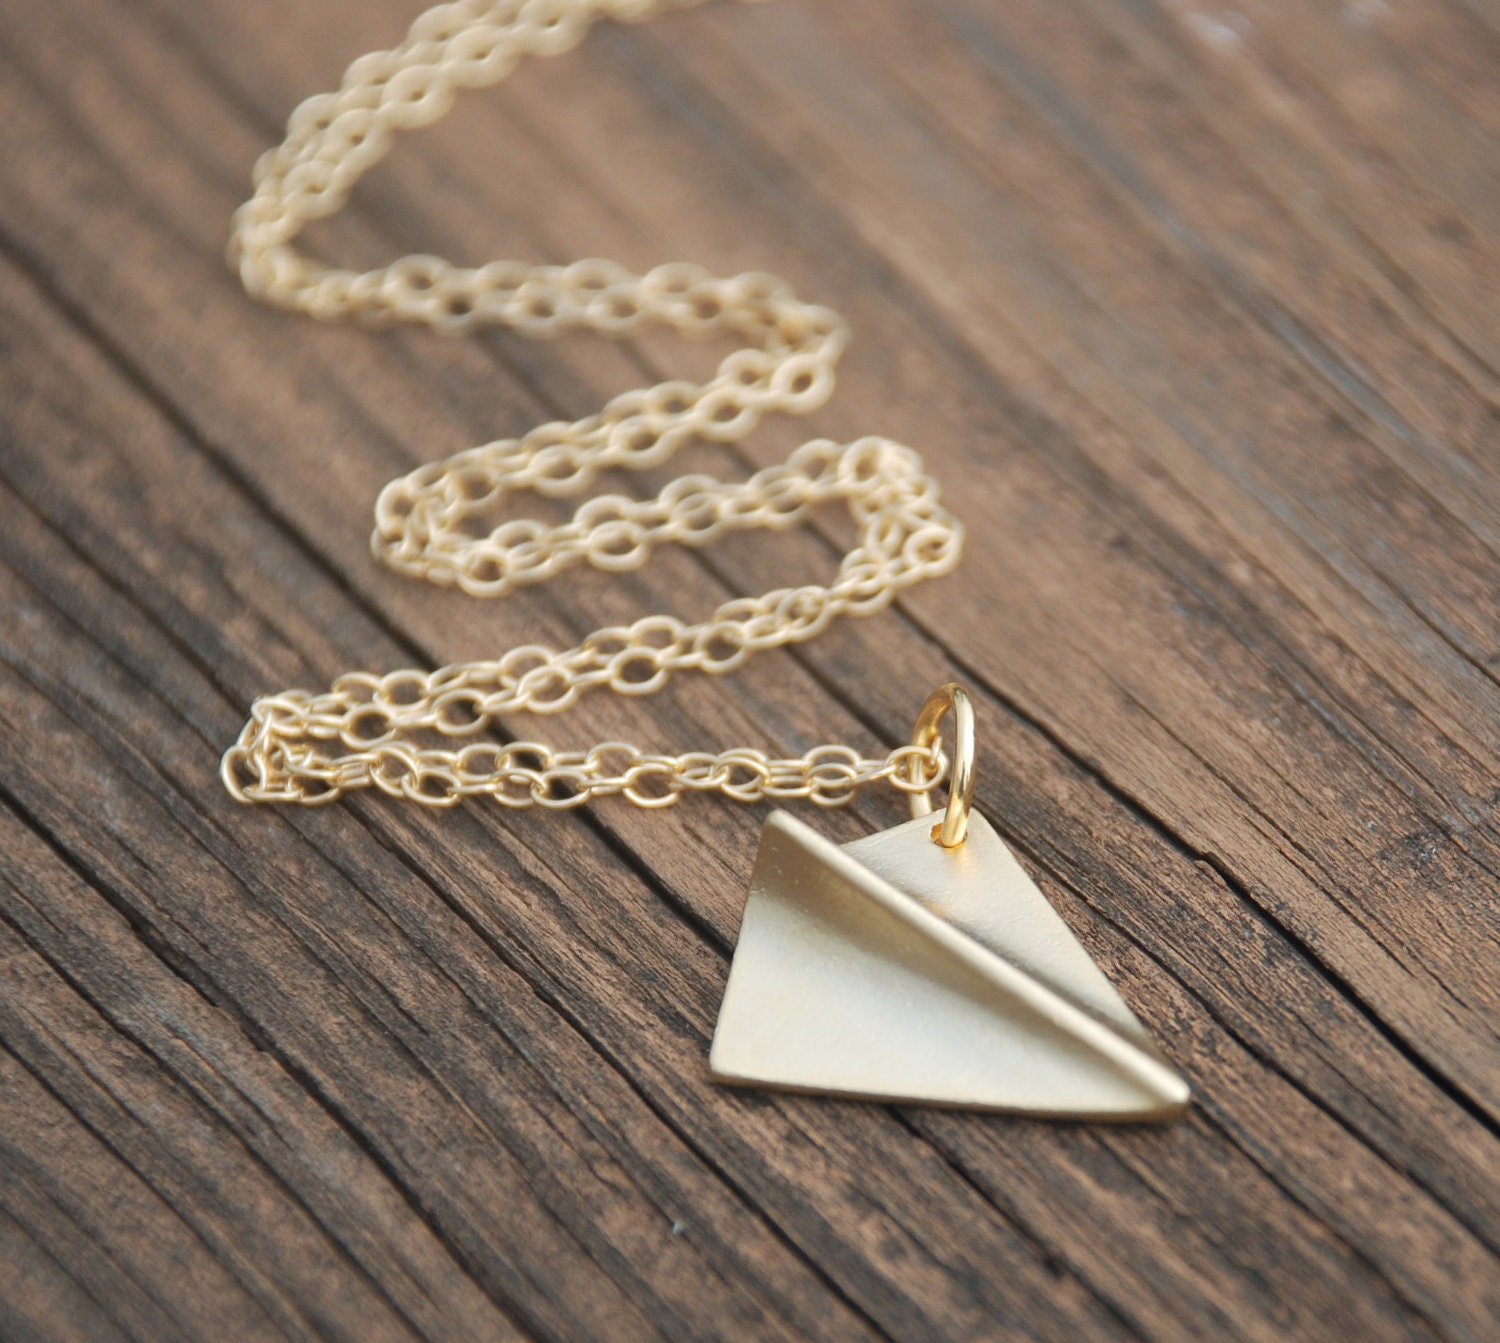 Gold Origami Paper Airplane 14K Giold Filled Chain plane Etsy